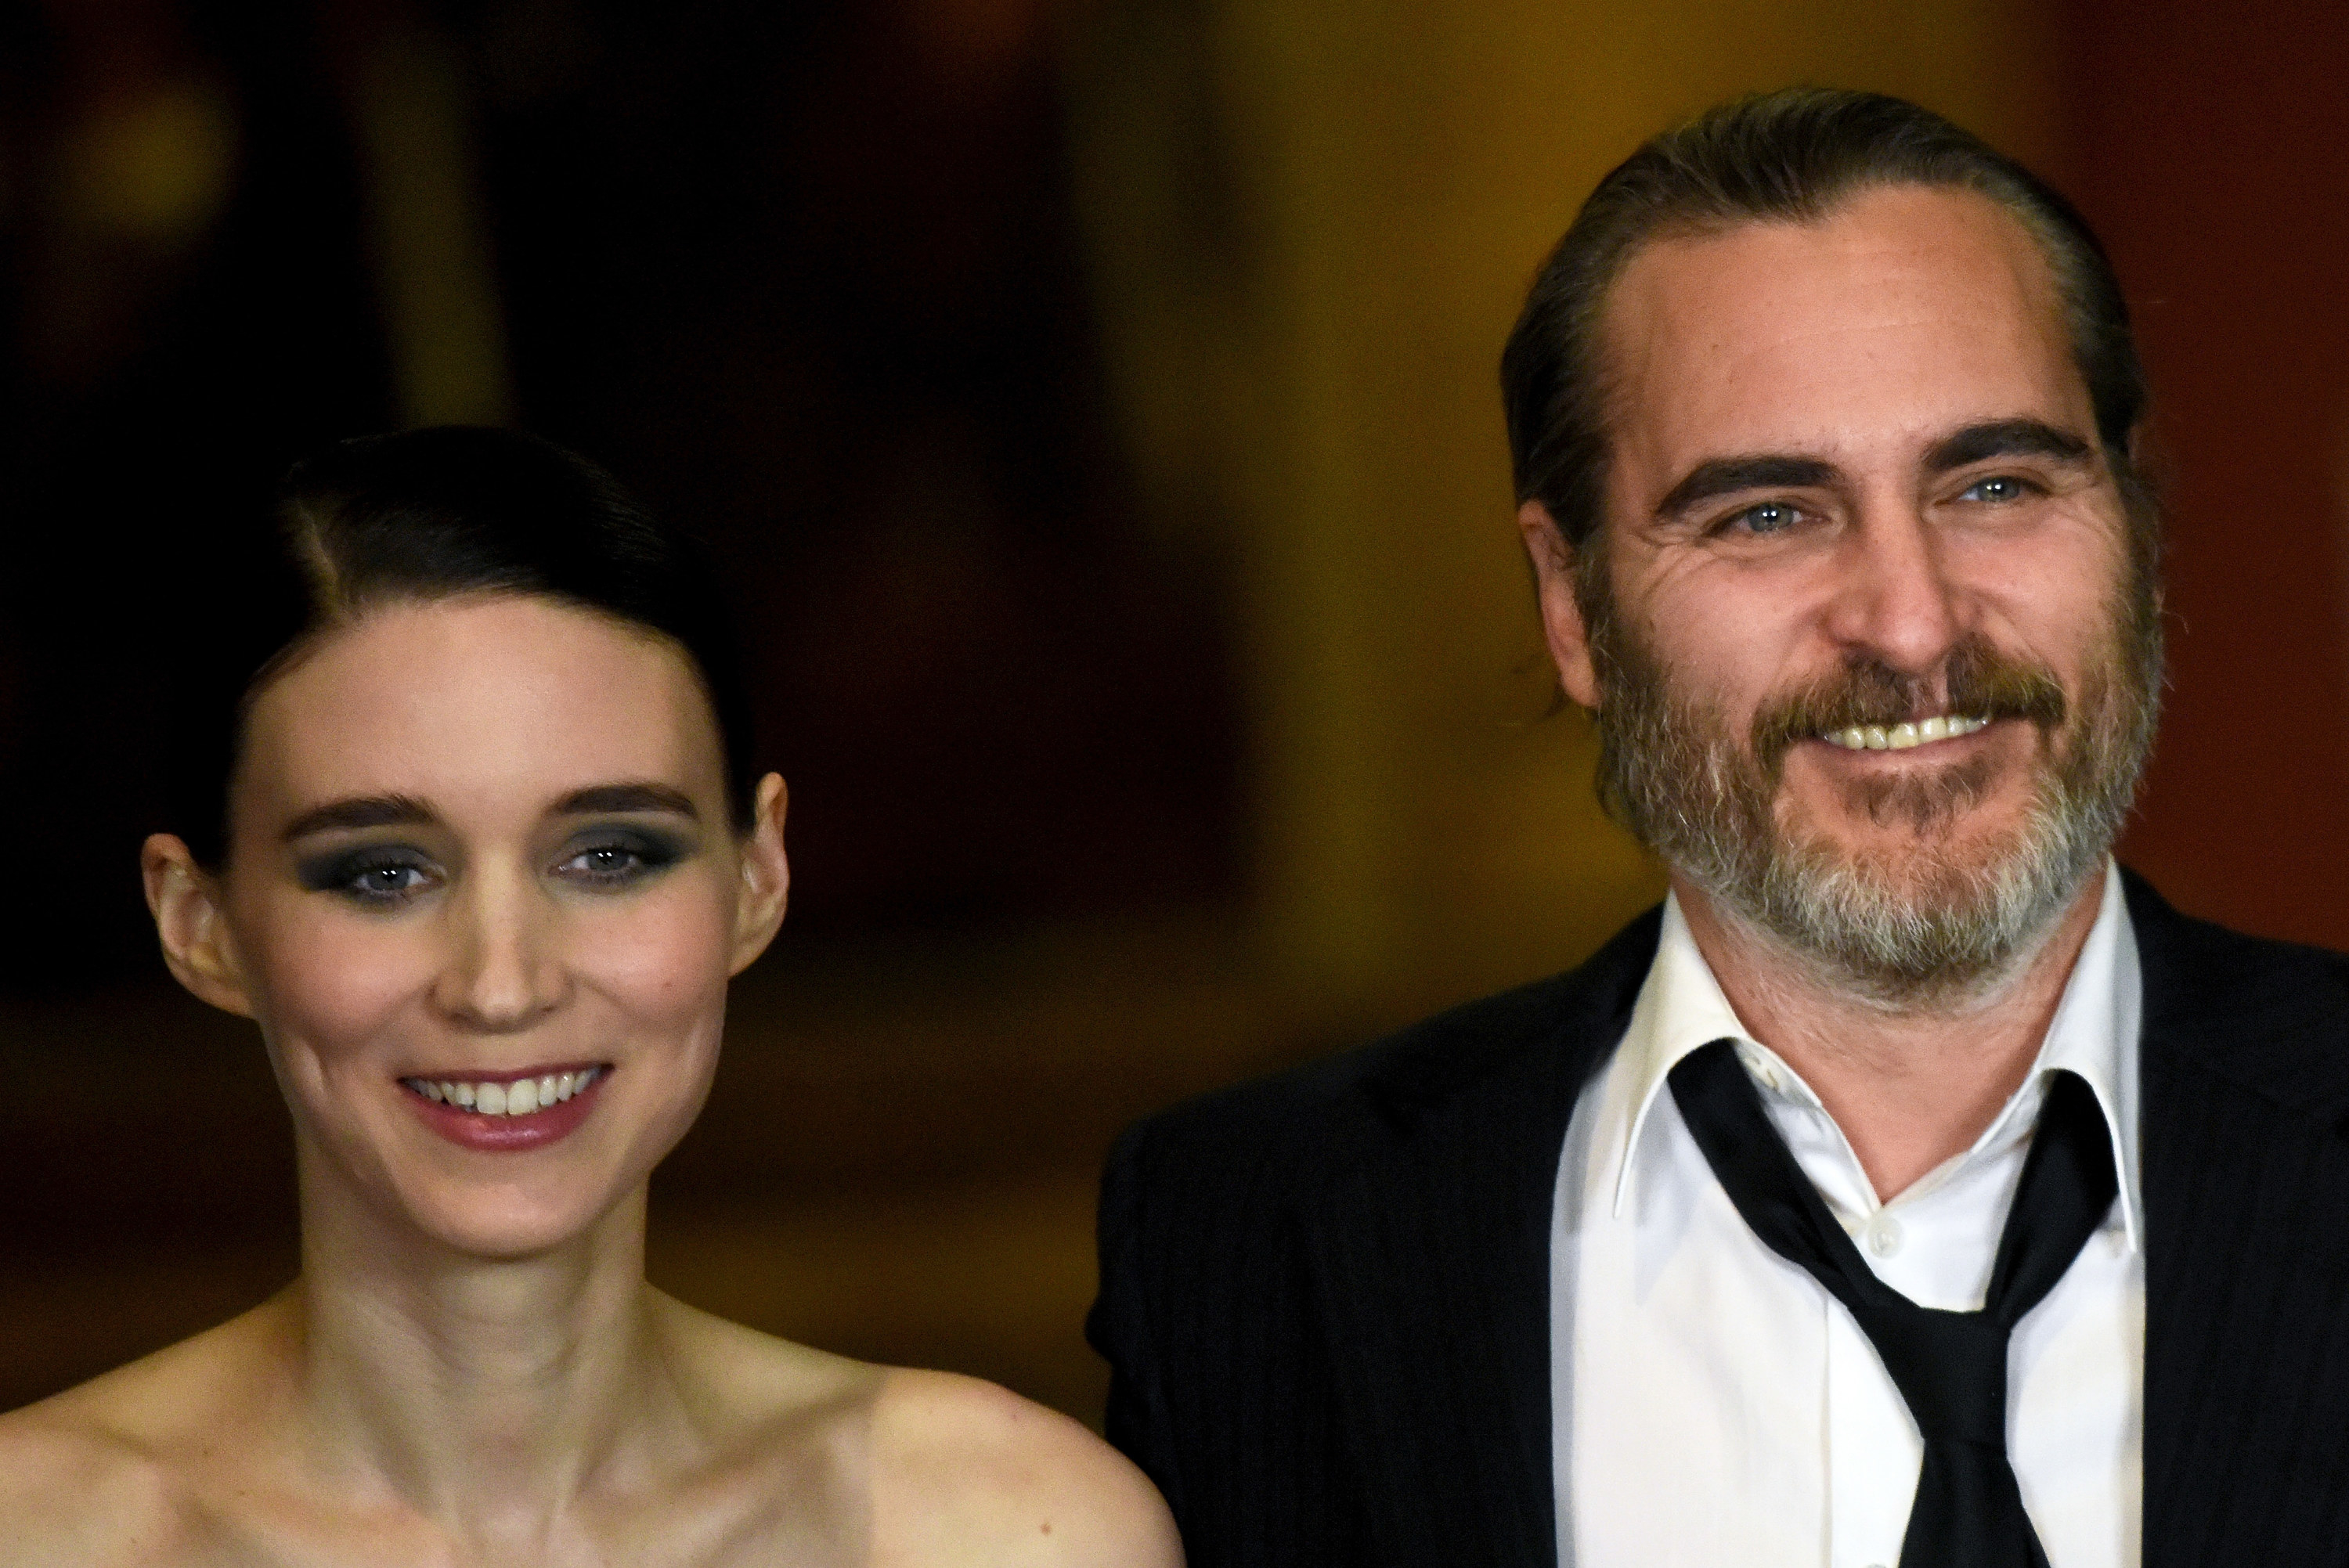 Rooney Mara and Joaquin Phoenix attend the &#x27;Mary Magdalene&#x27; special screening held at The National Gallery on February 26, 2018 in London, England.